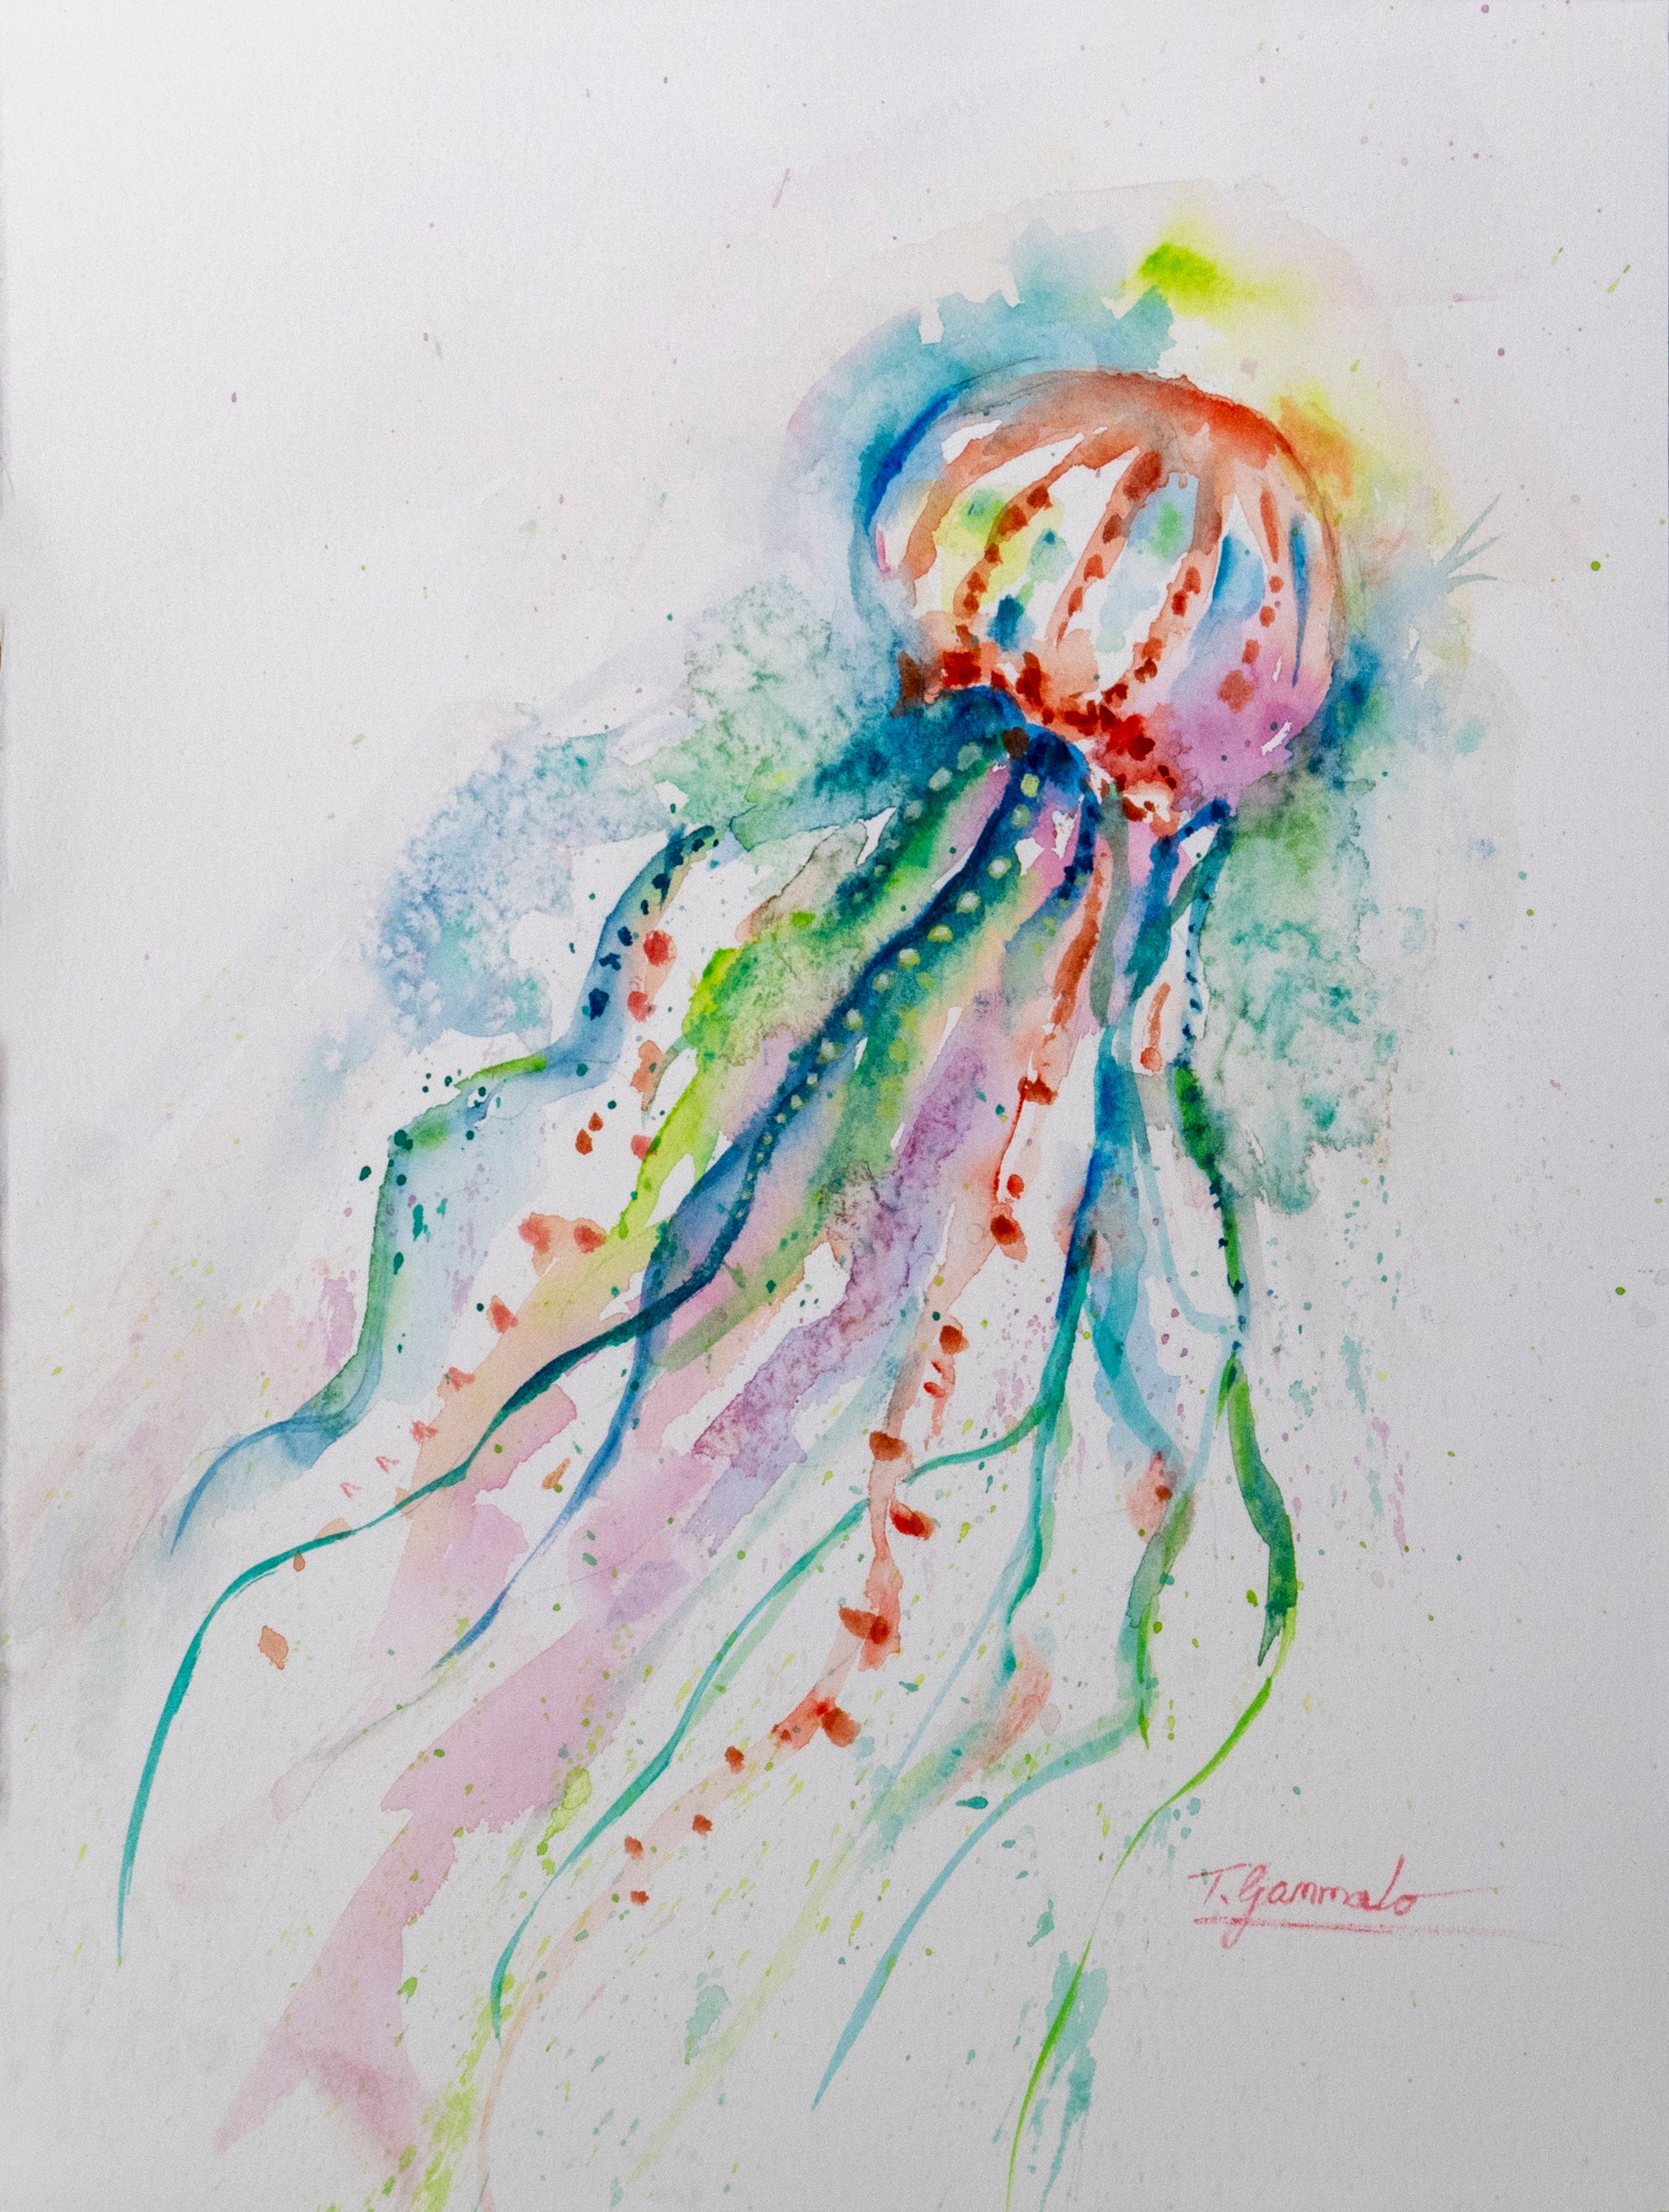 Colorful watercolor drawing of a jellyfish titled 'Going with the Flow' by artist Teri Gammalo.